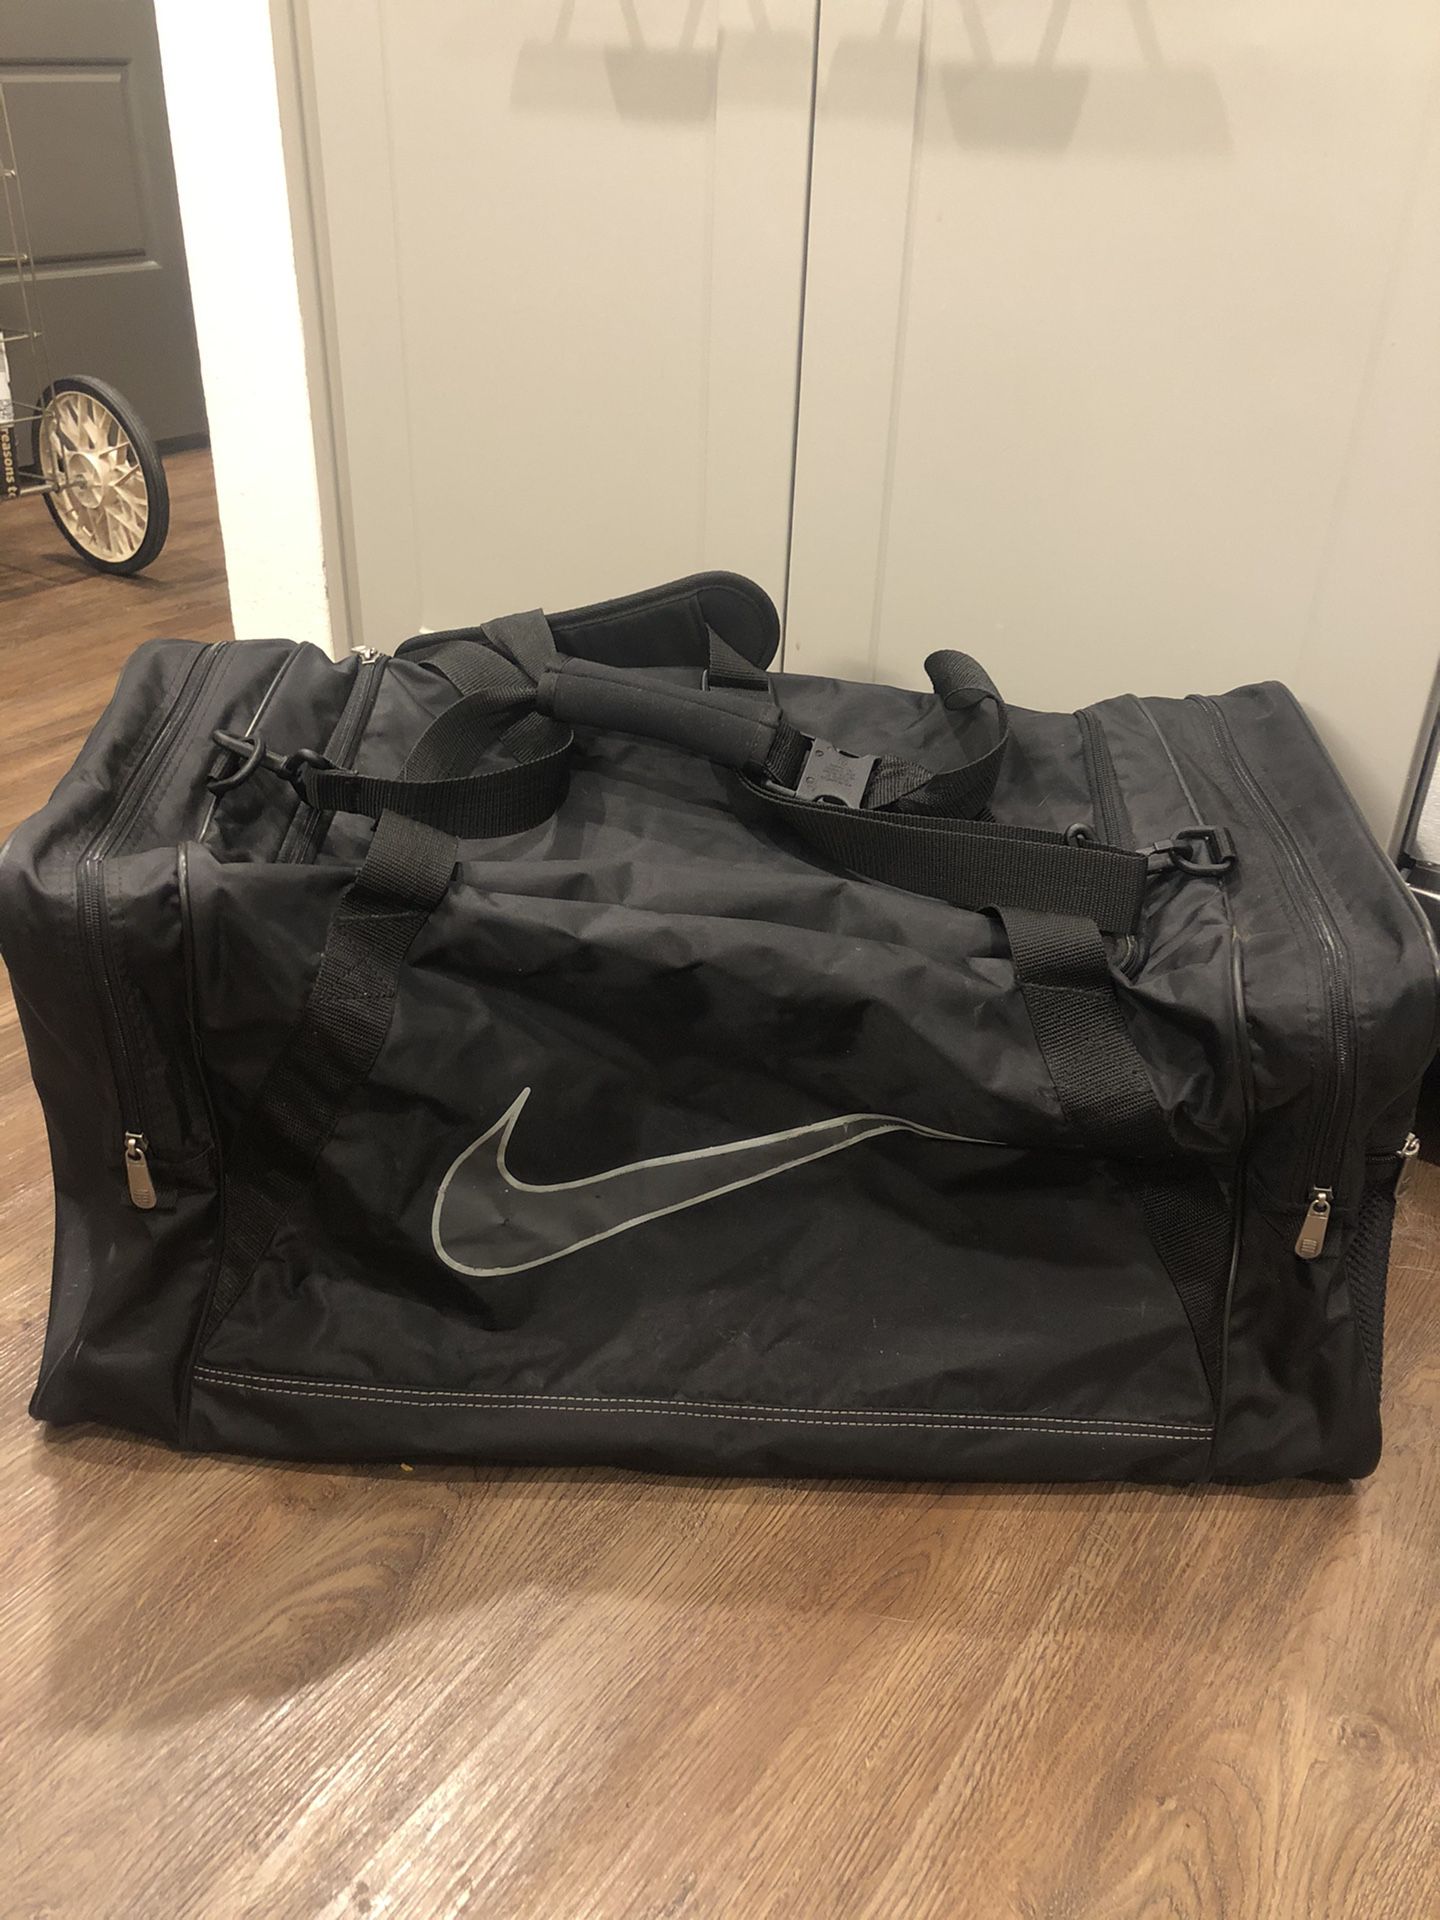 Excellent Condition Nike Duffle Bag